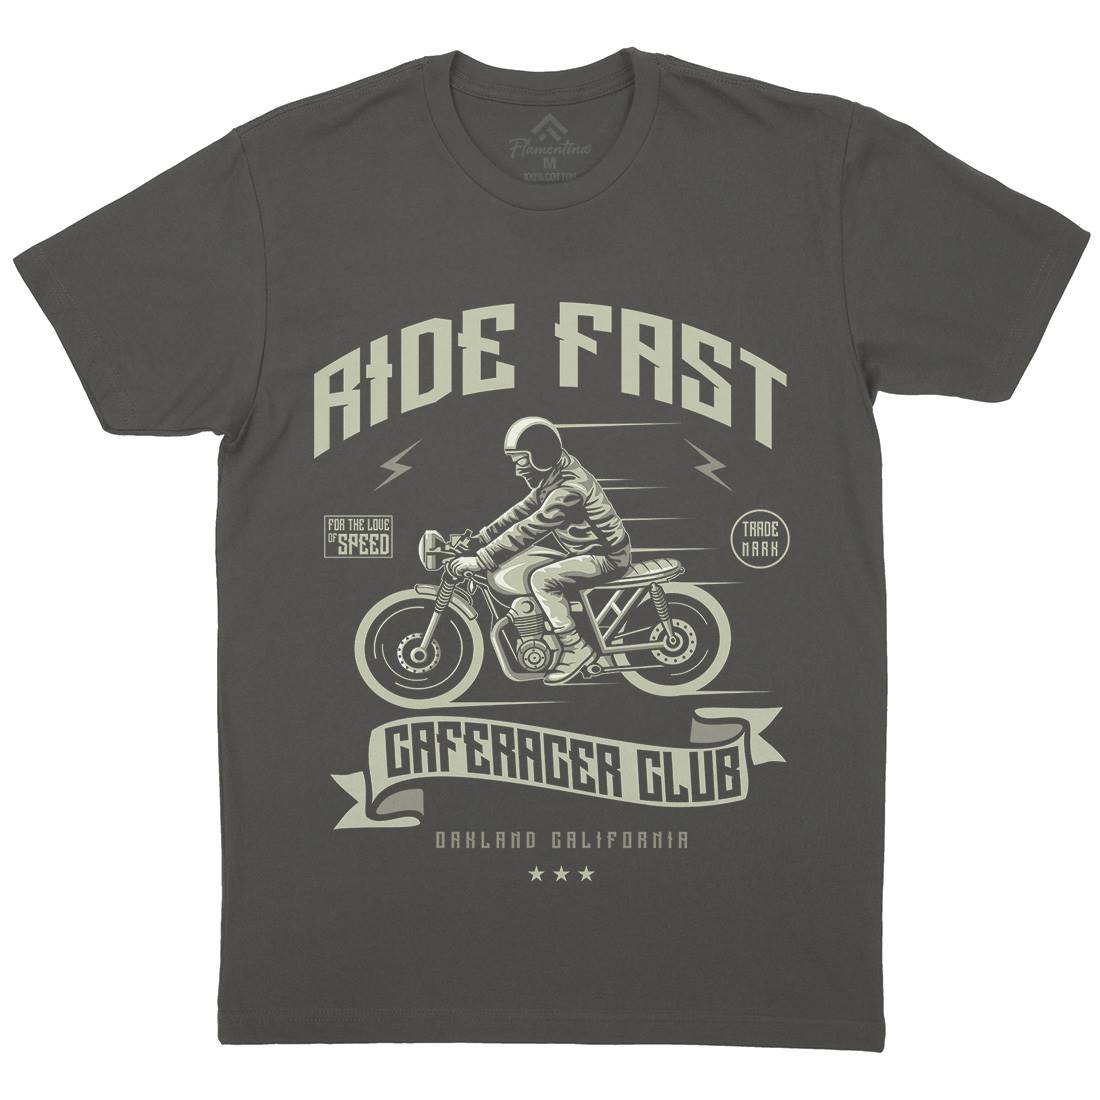 Ride Fast Mens Crew Neck T-Shirt Motorcycles A117